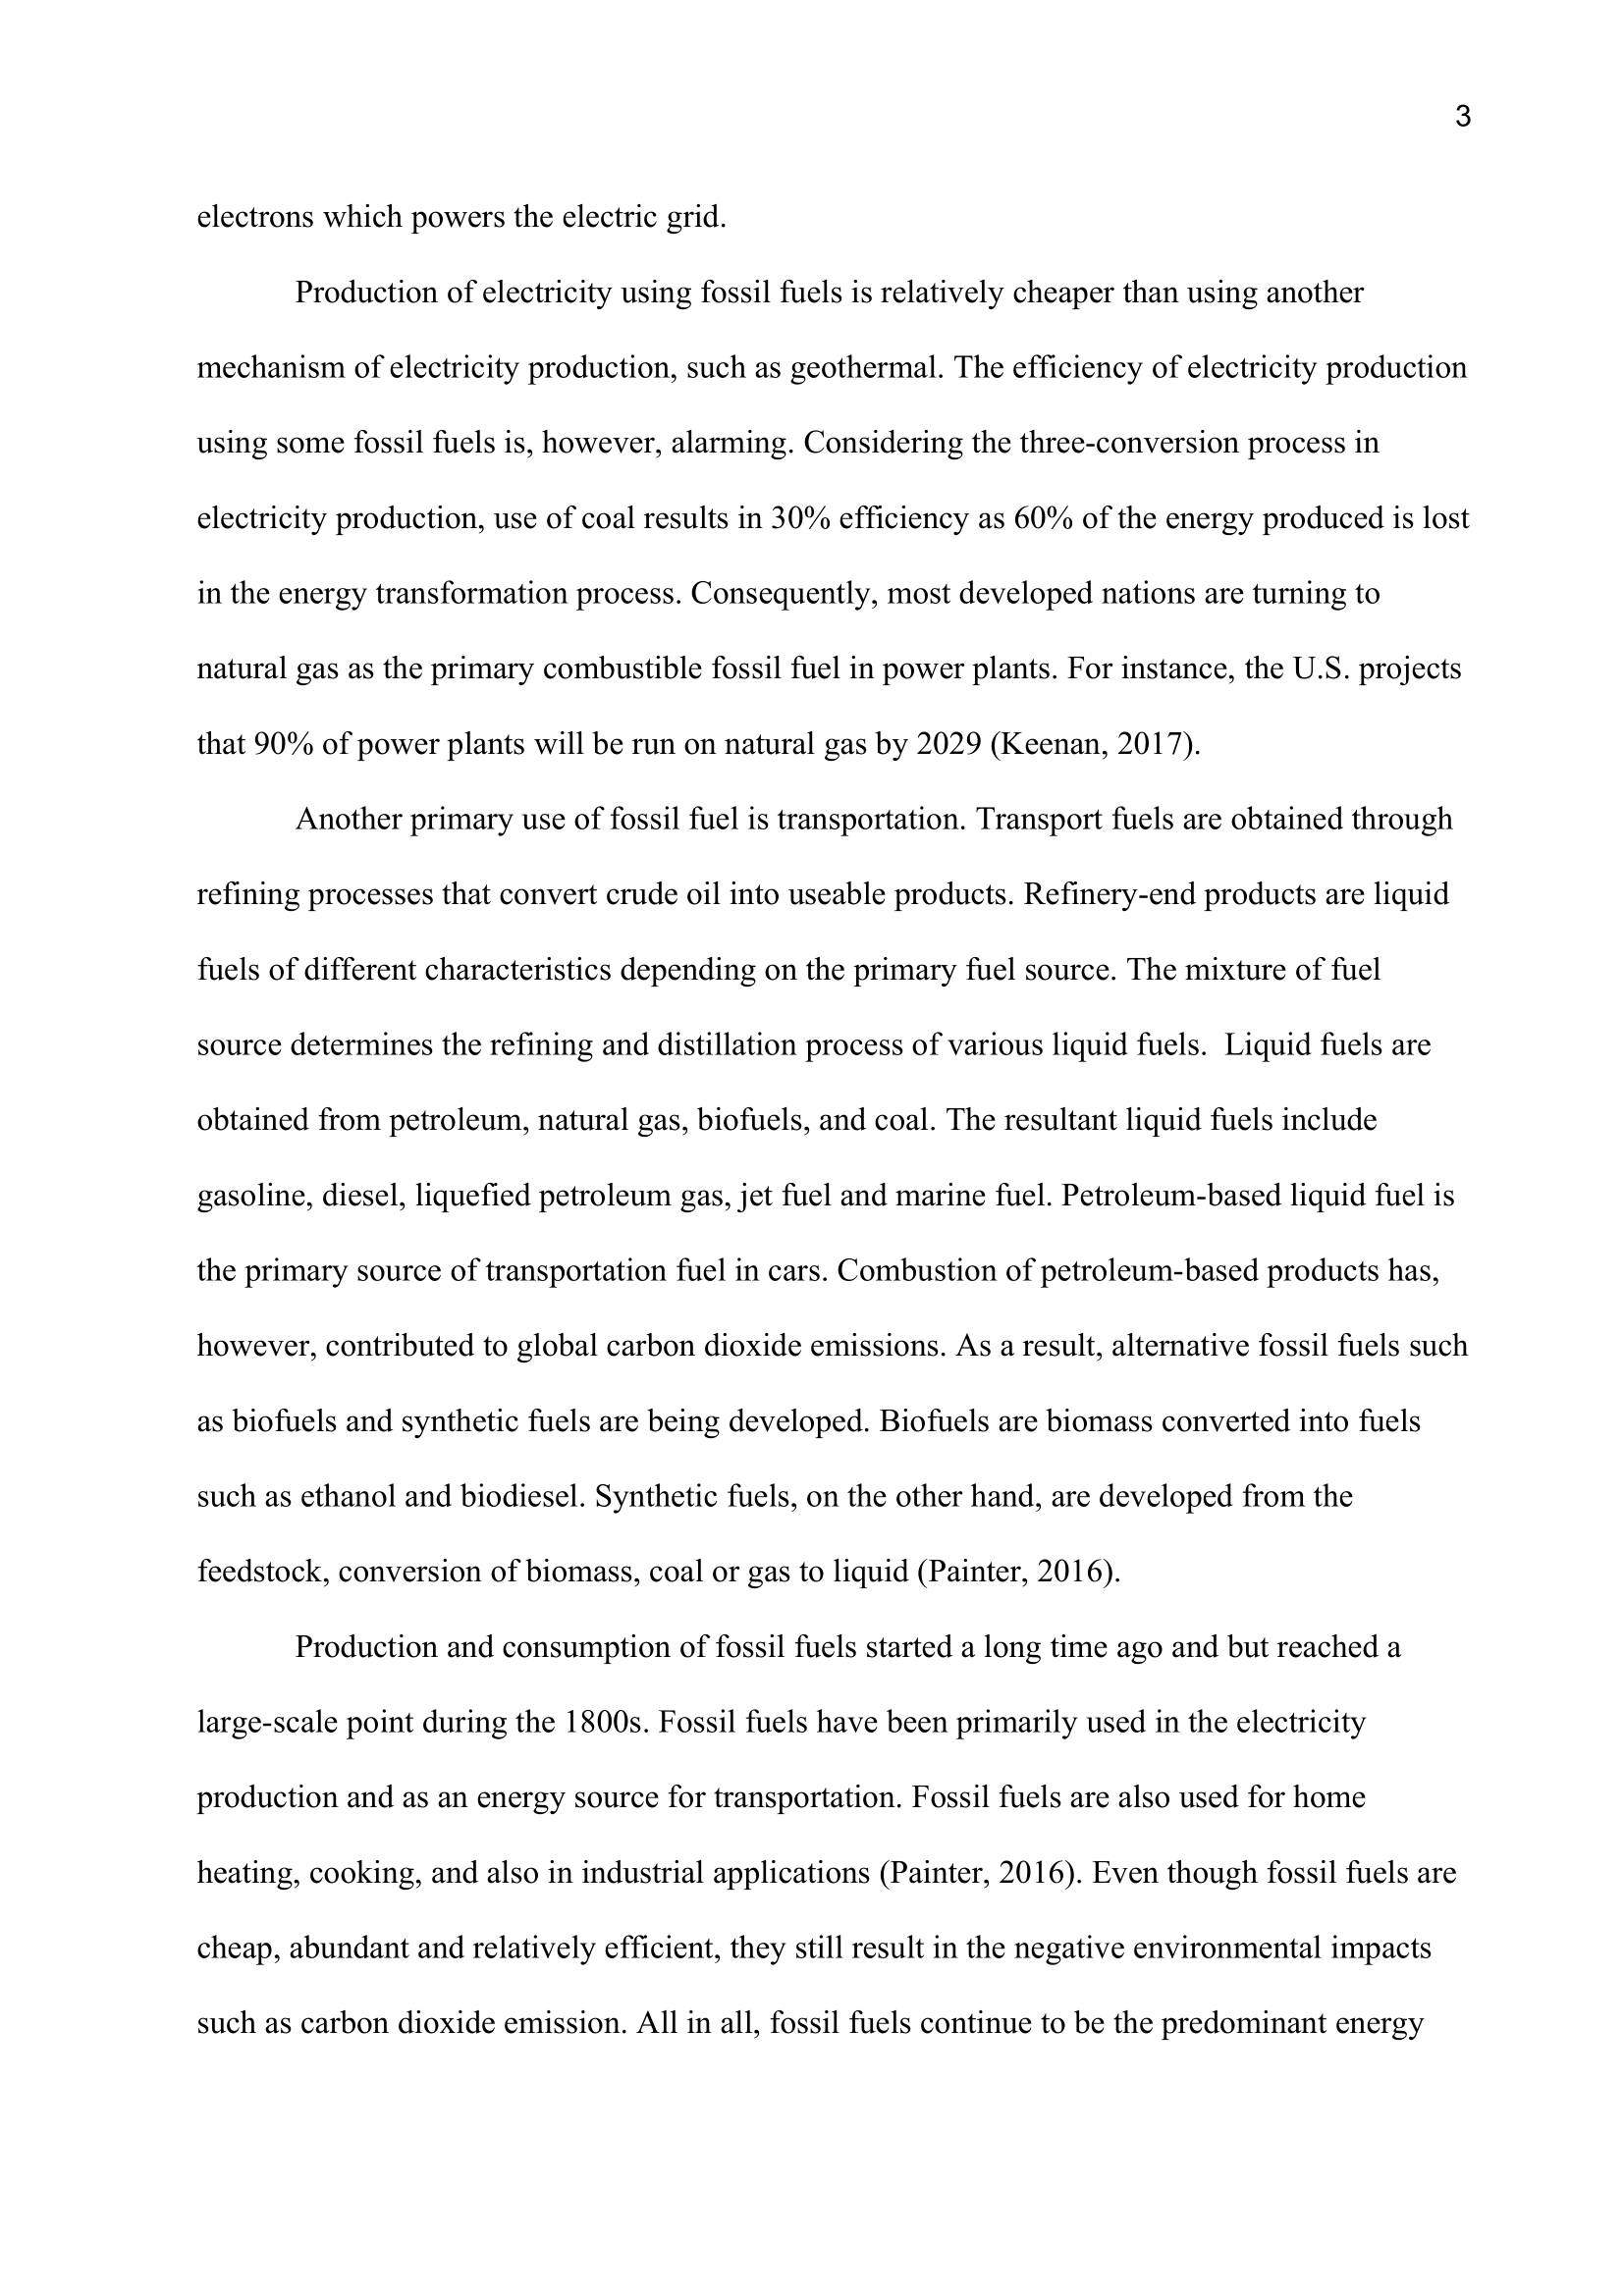 Extended essay help online